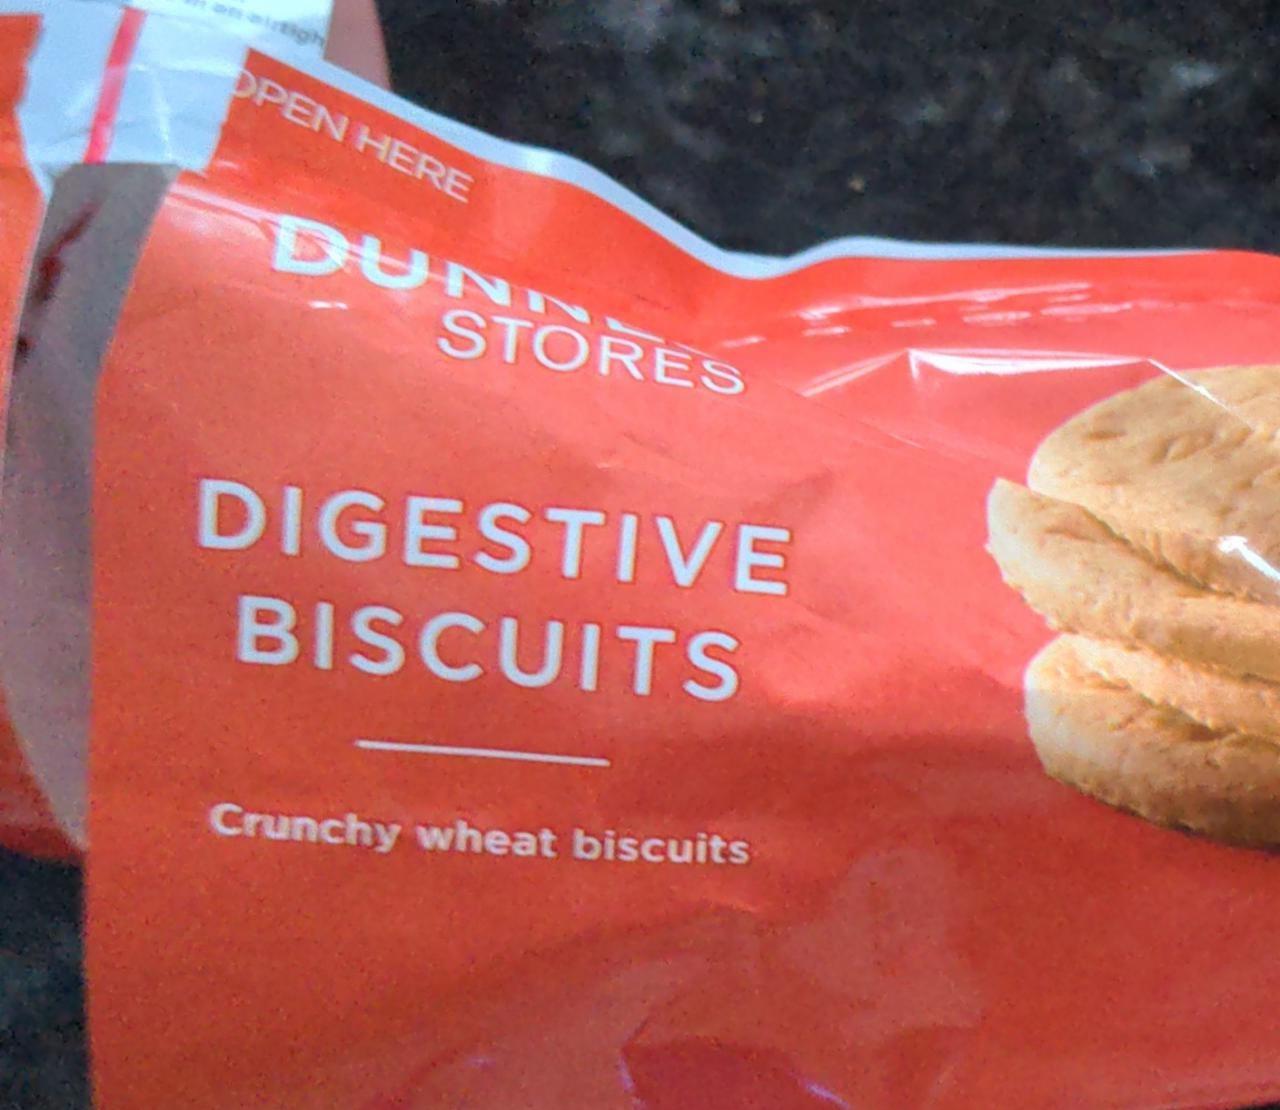 Fotografie - Digestive biscuits Dunnes Stores